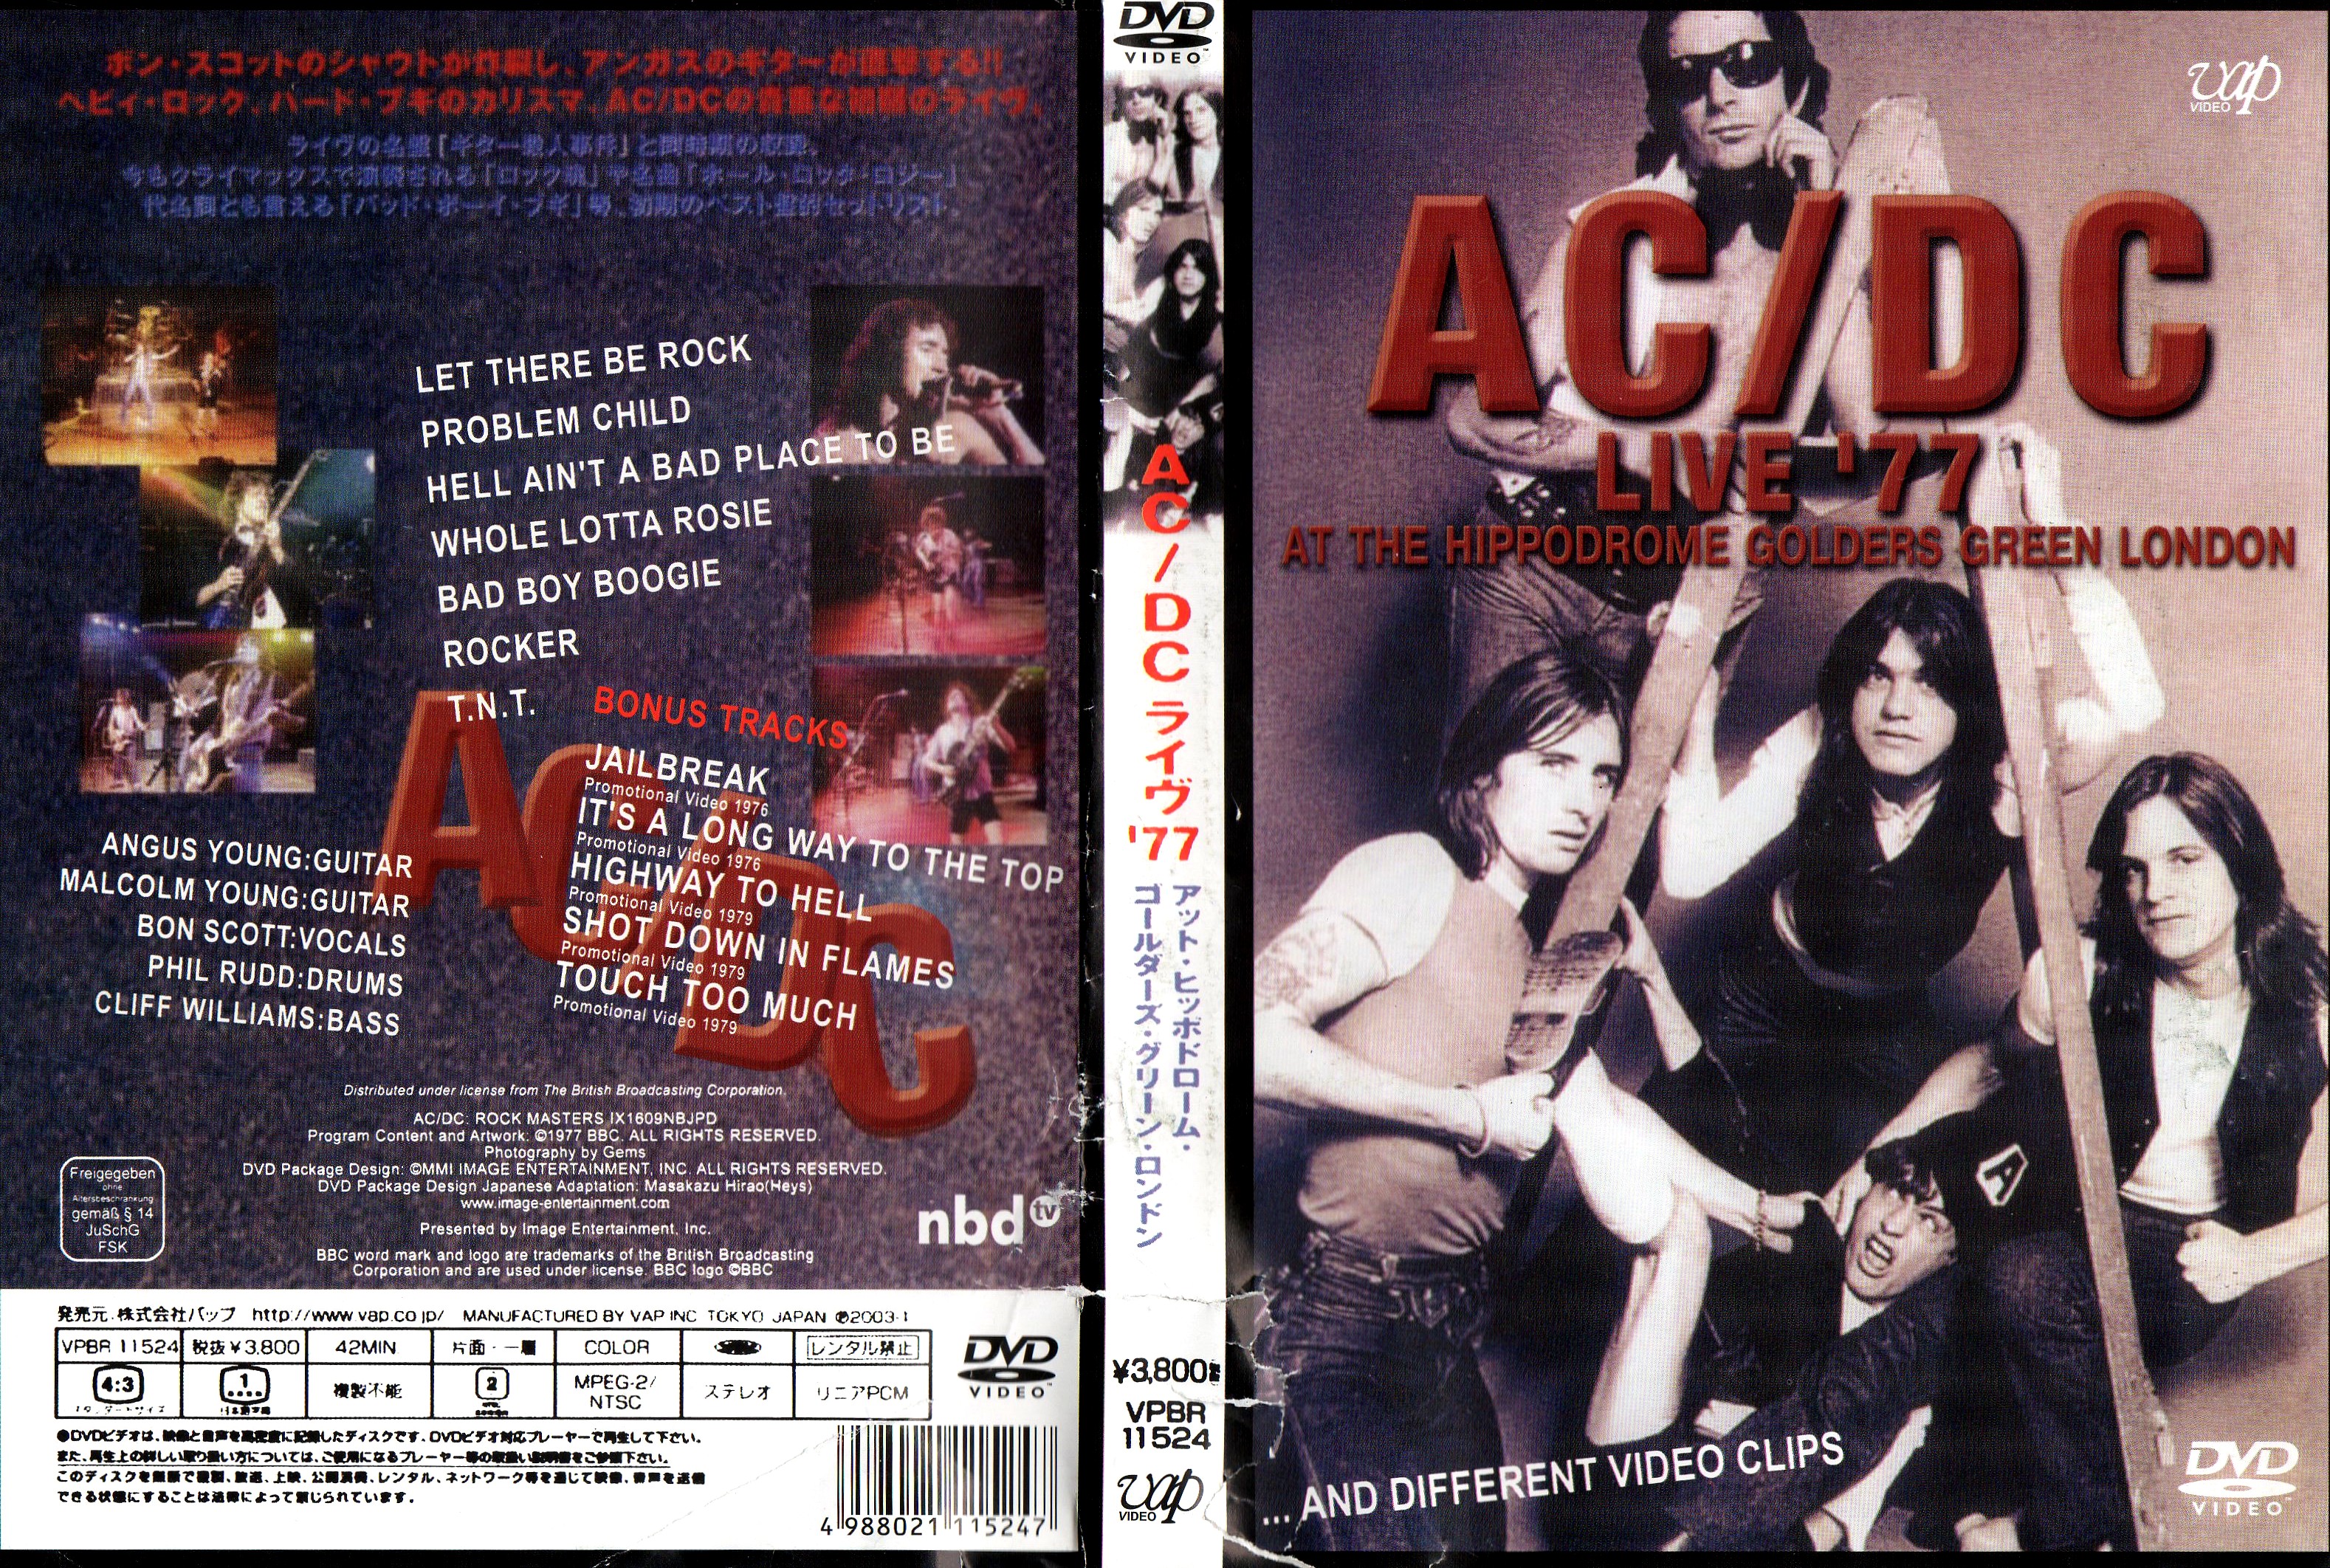 Jaquette DVD ACDC Live 77 at the hippodrome golders green London